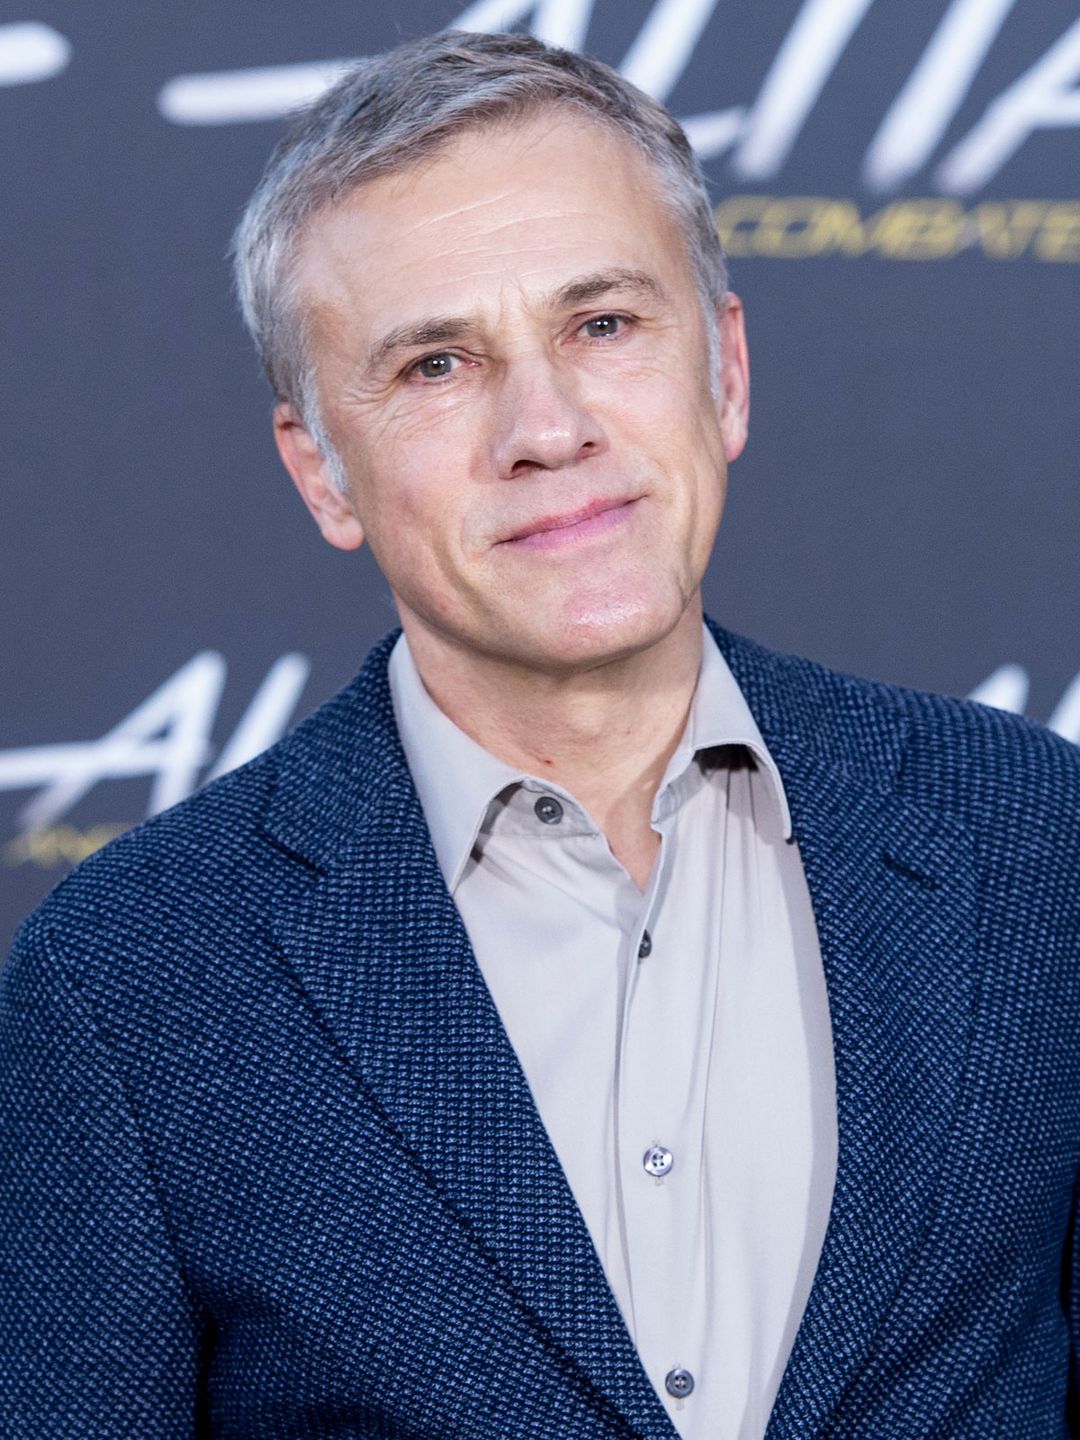 Christoph Waltz does he have kids